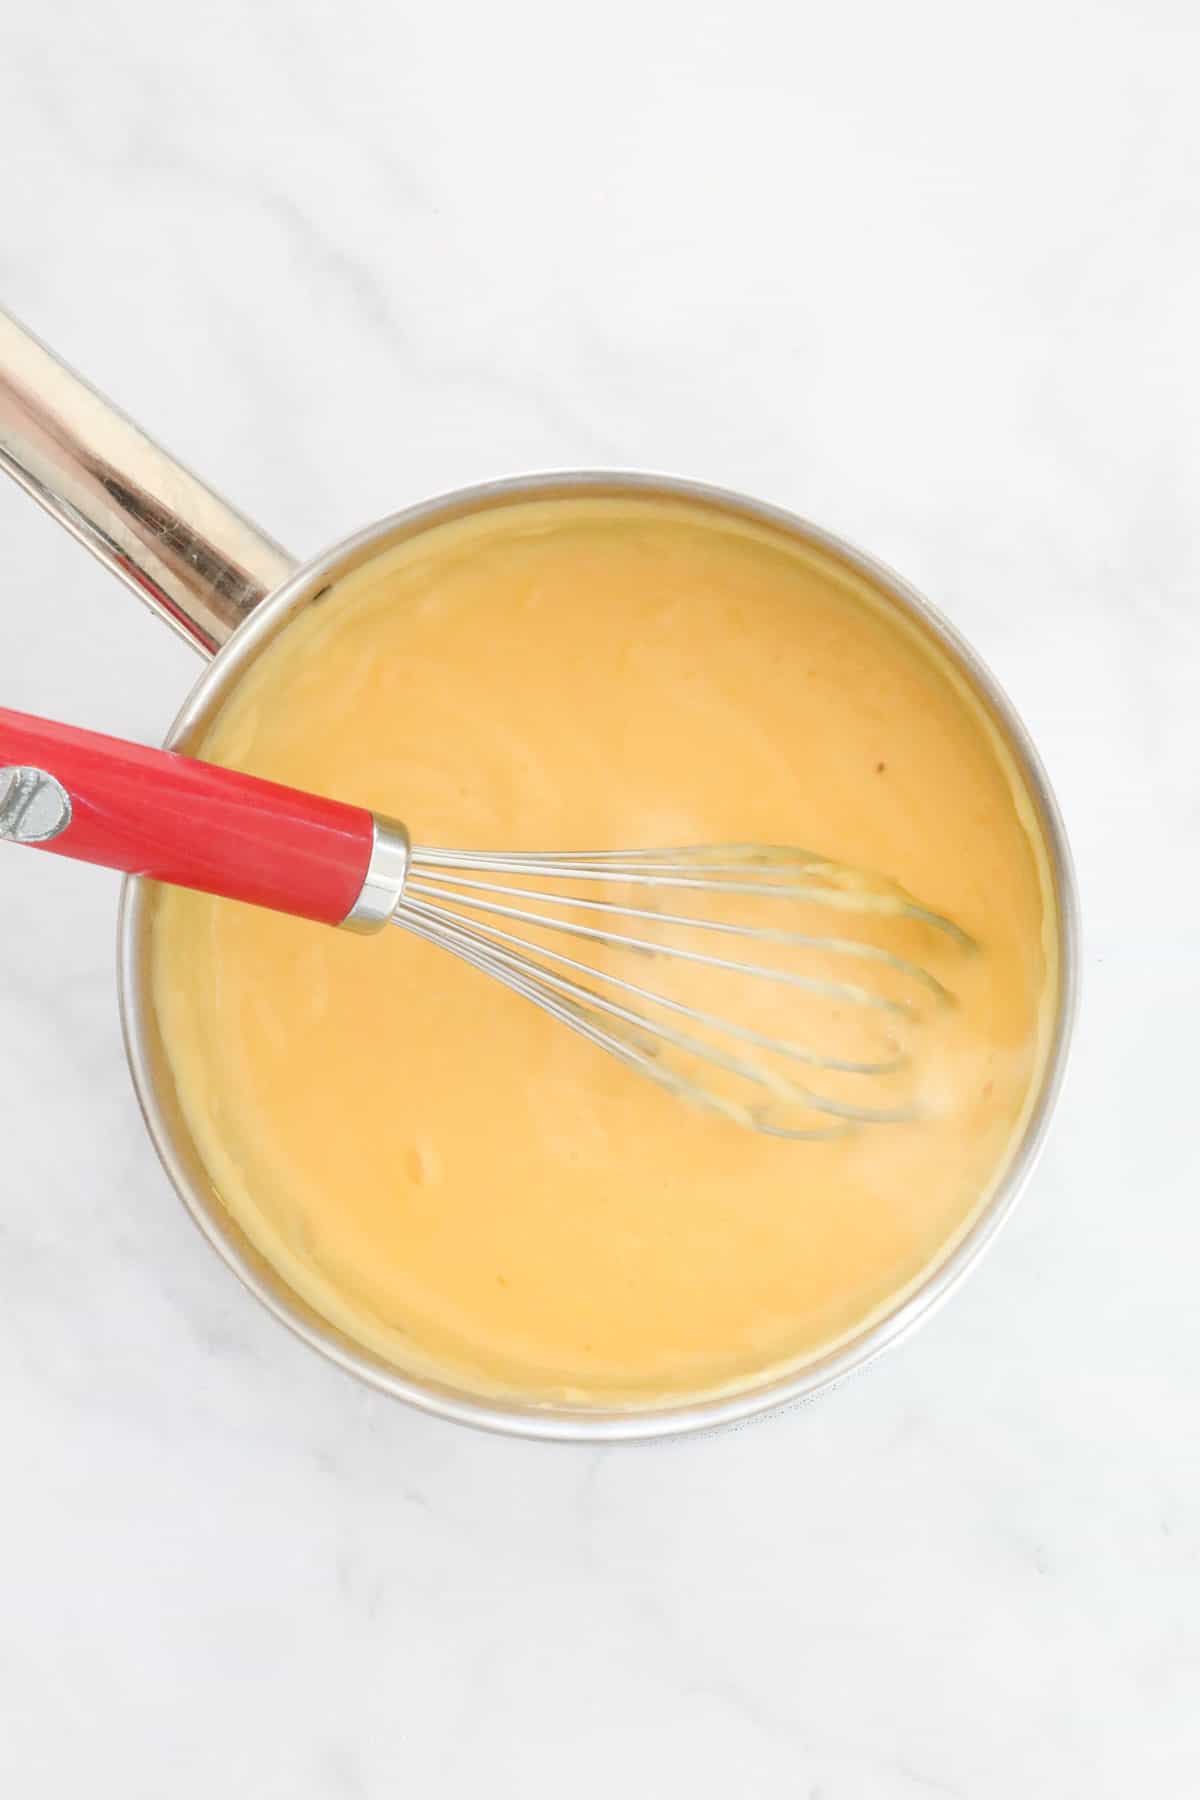 Thickened custard powder in a pot with a red handled whisk.